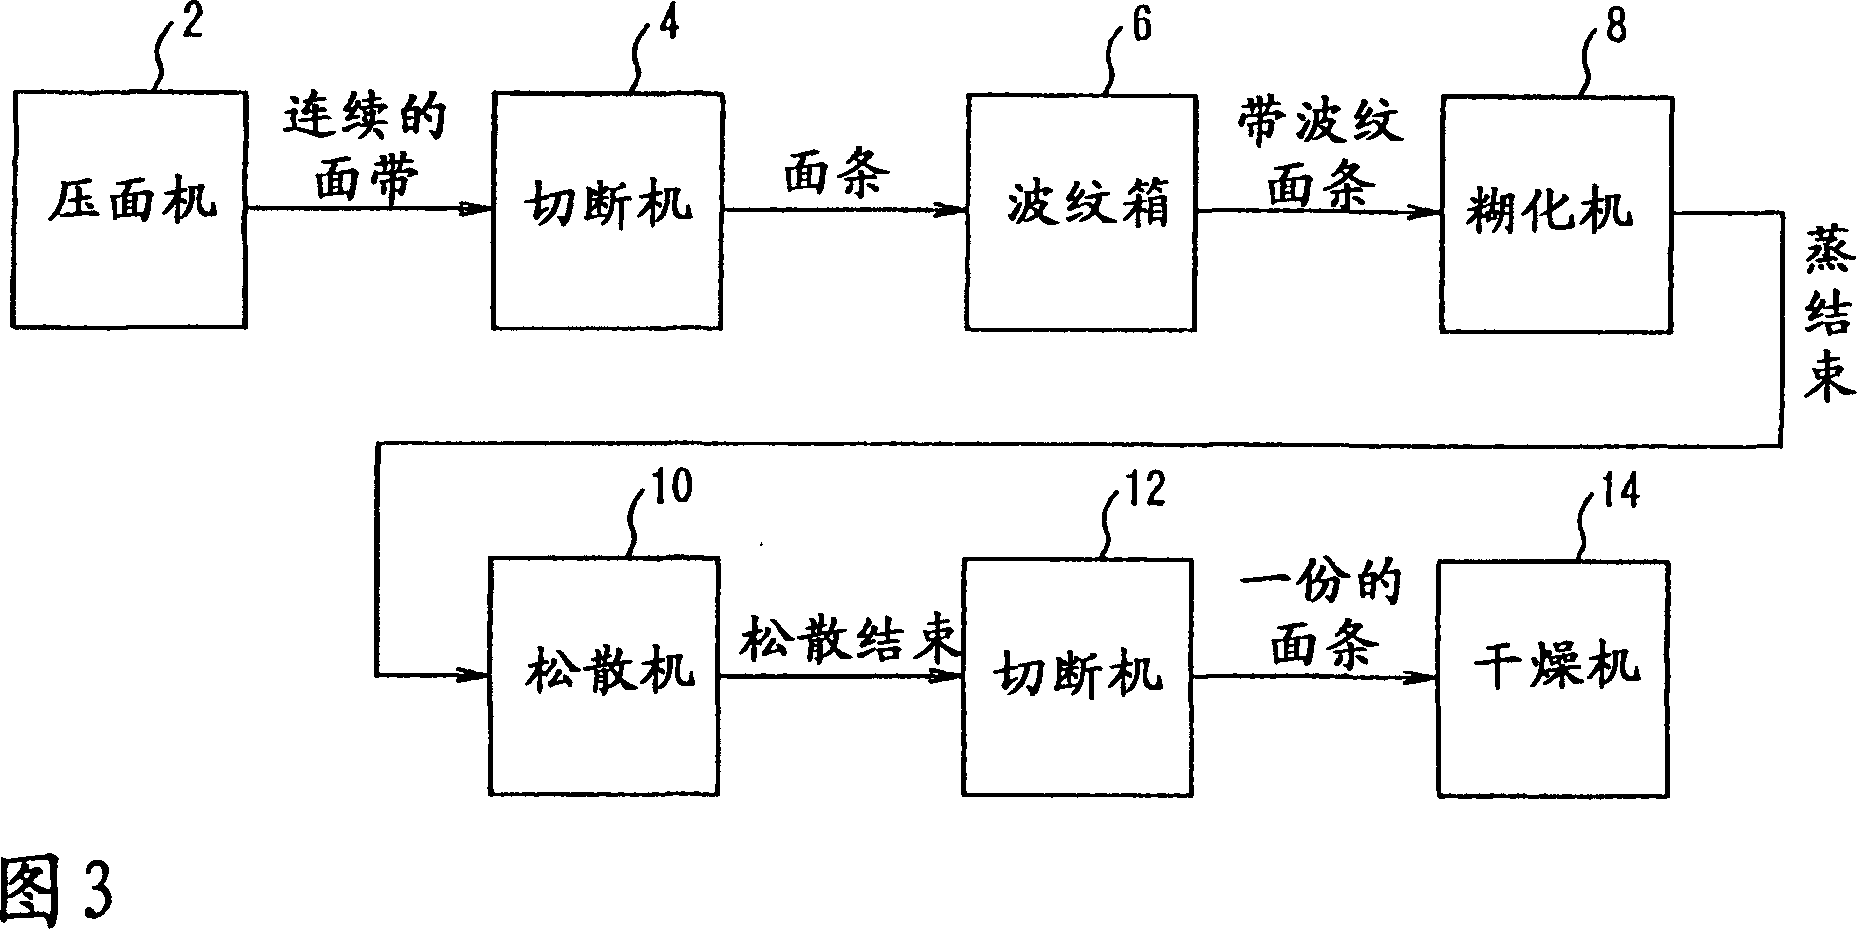 Method and device for manufacturing waved noodle